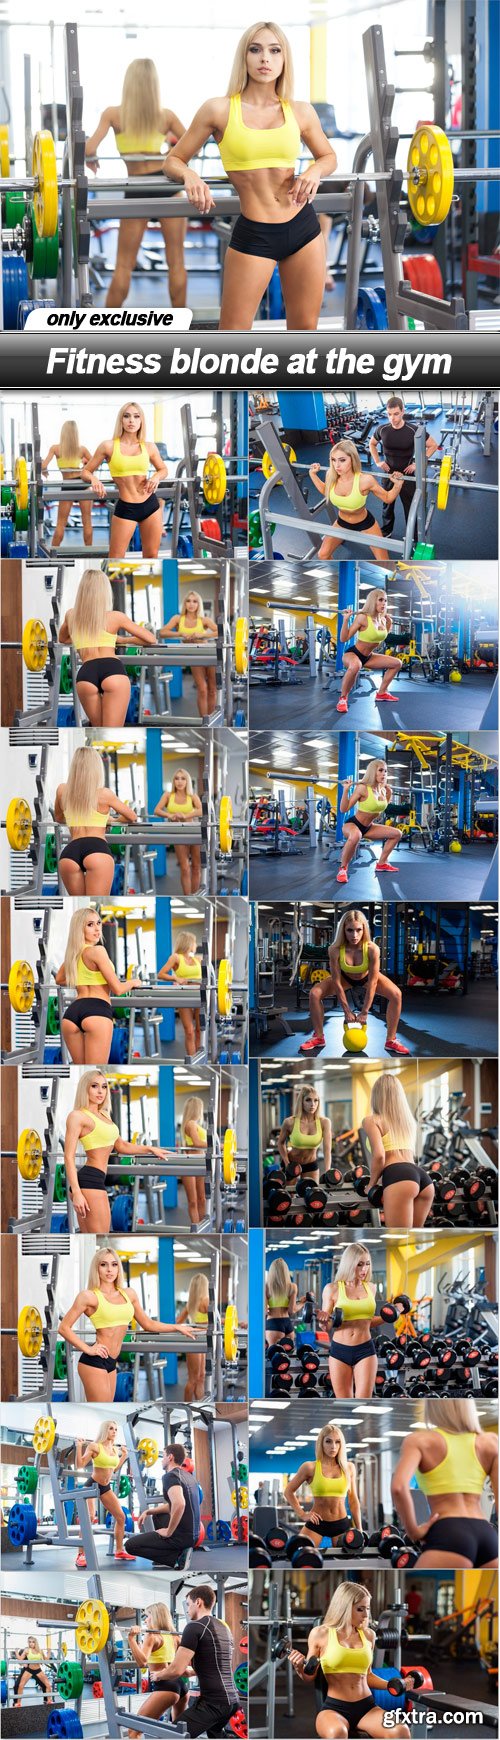 Fitness blonde at the gym - 16 UHQ JPEG